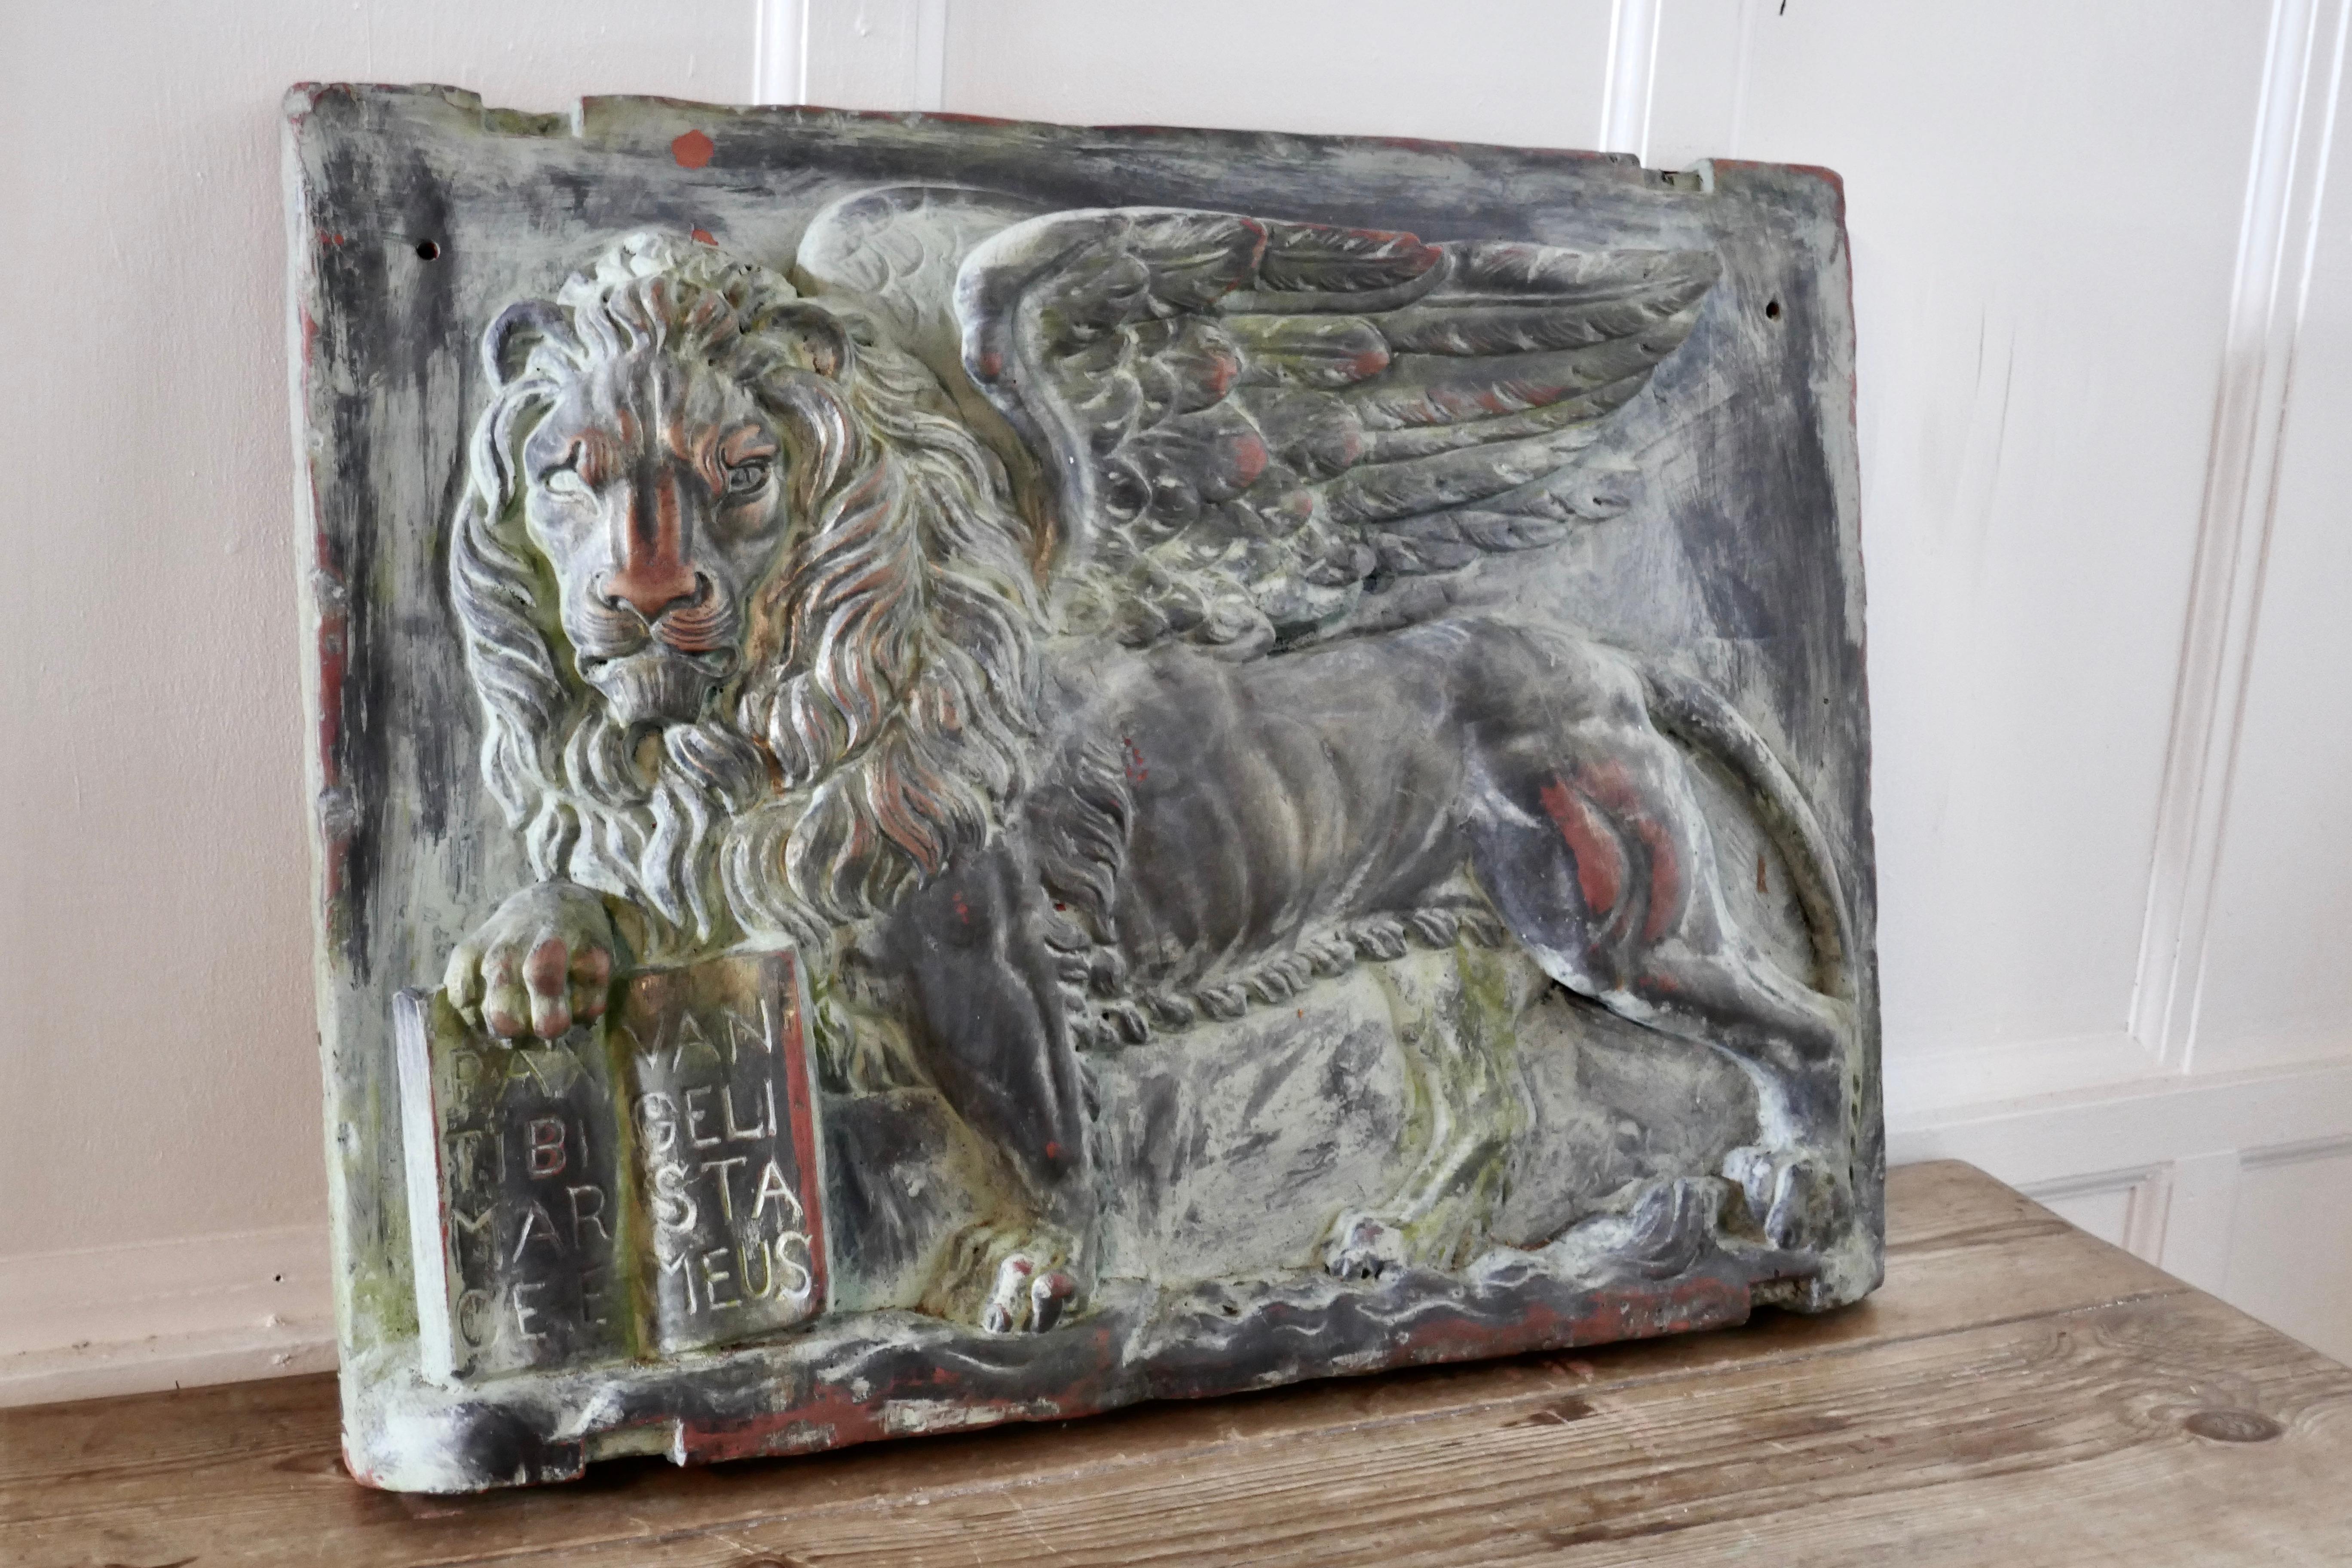 Ceramic Heavy Bronze Effect Wall Plaque Depicting the Winged Lion of St Mark, Venice